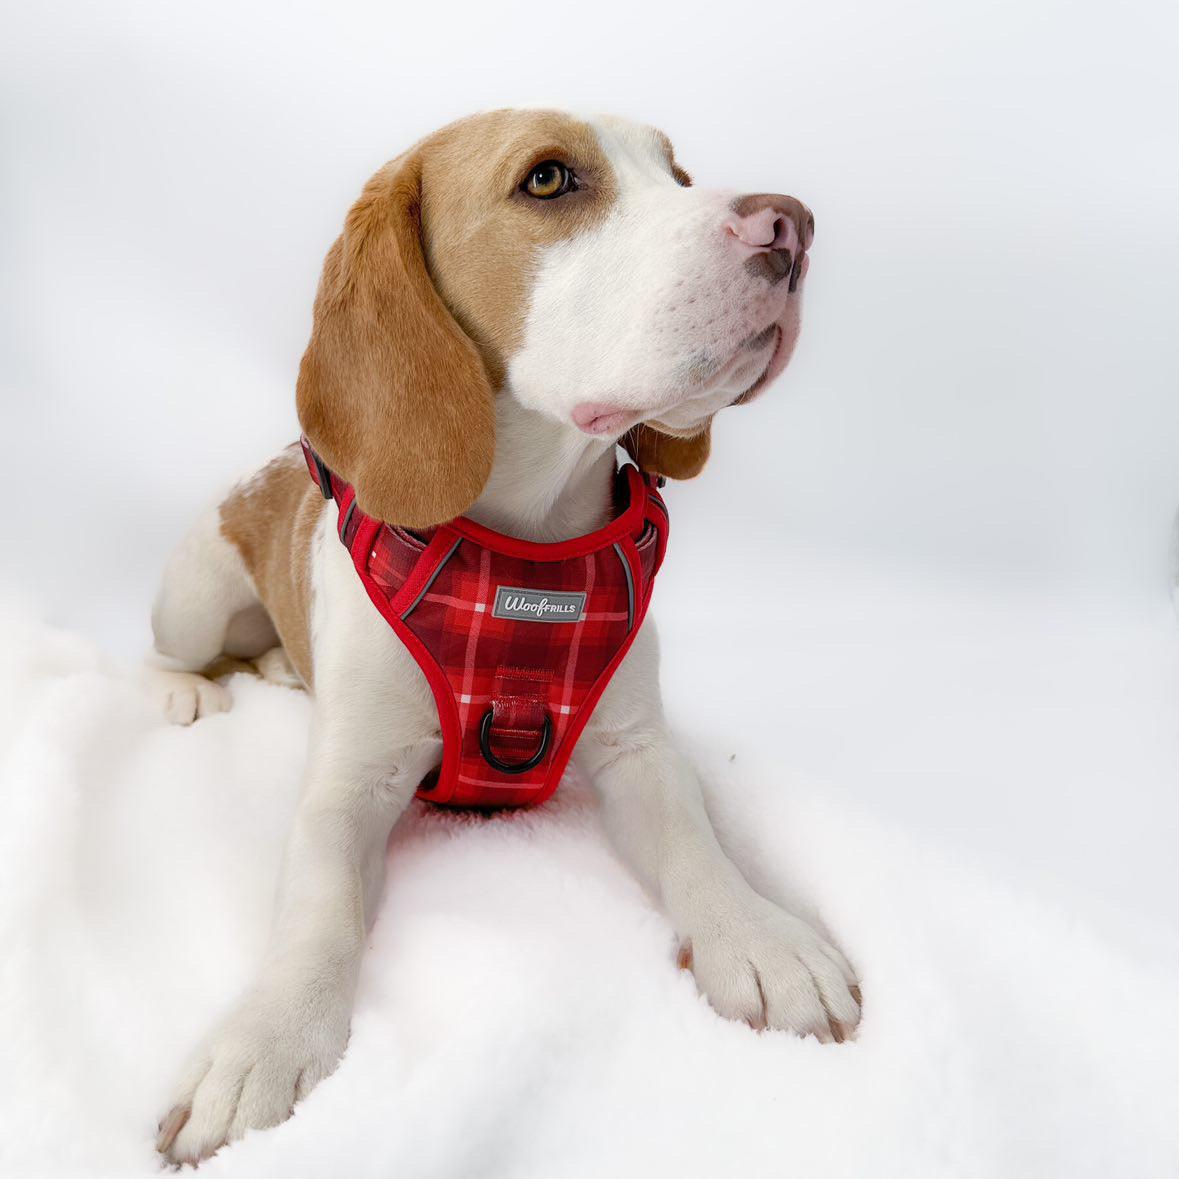 Beagle wearing a red dog harness